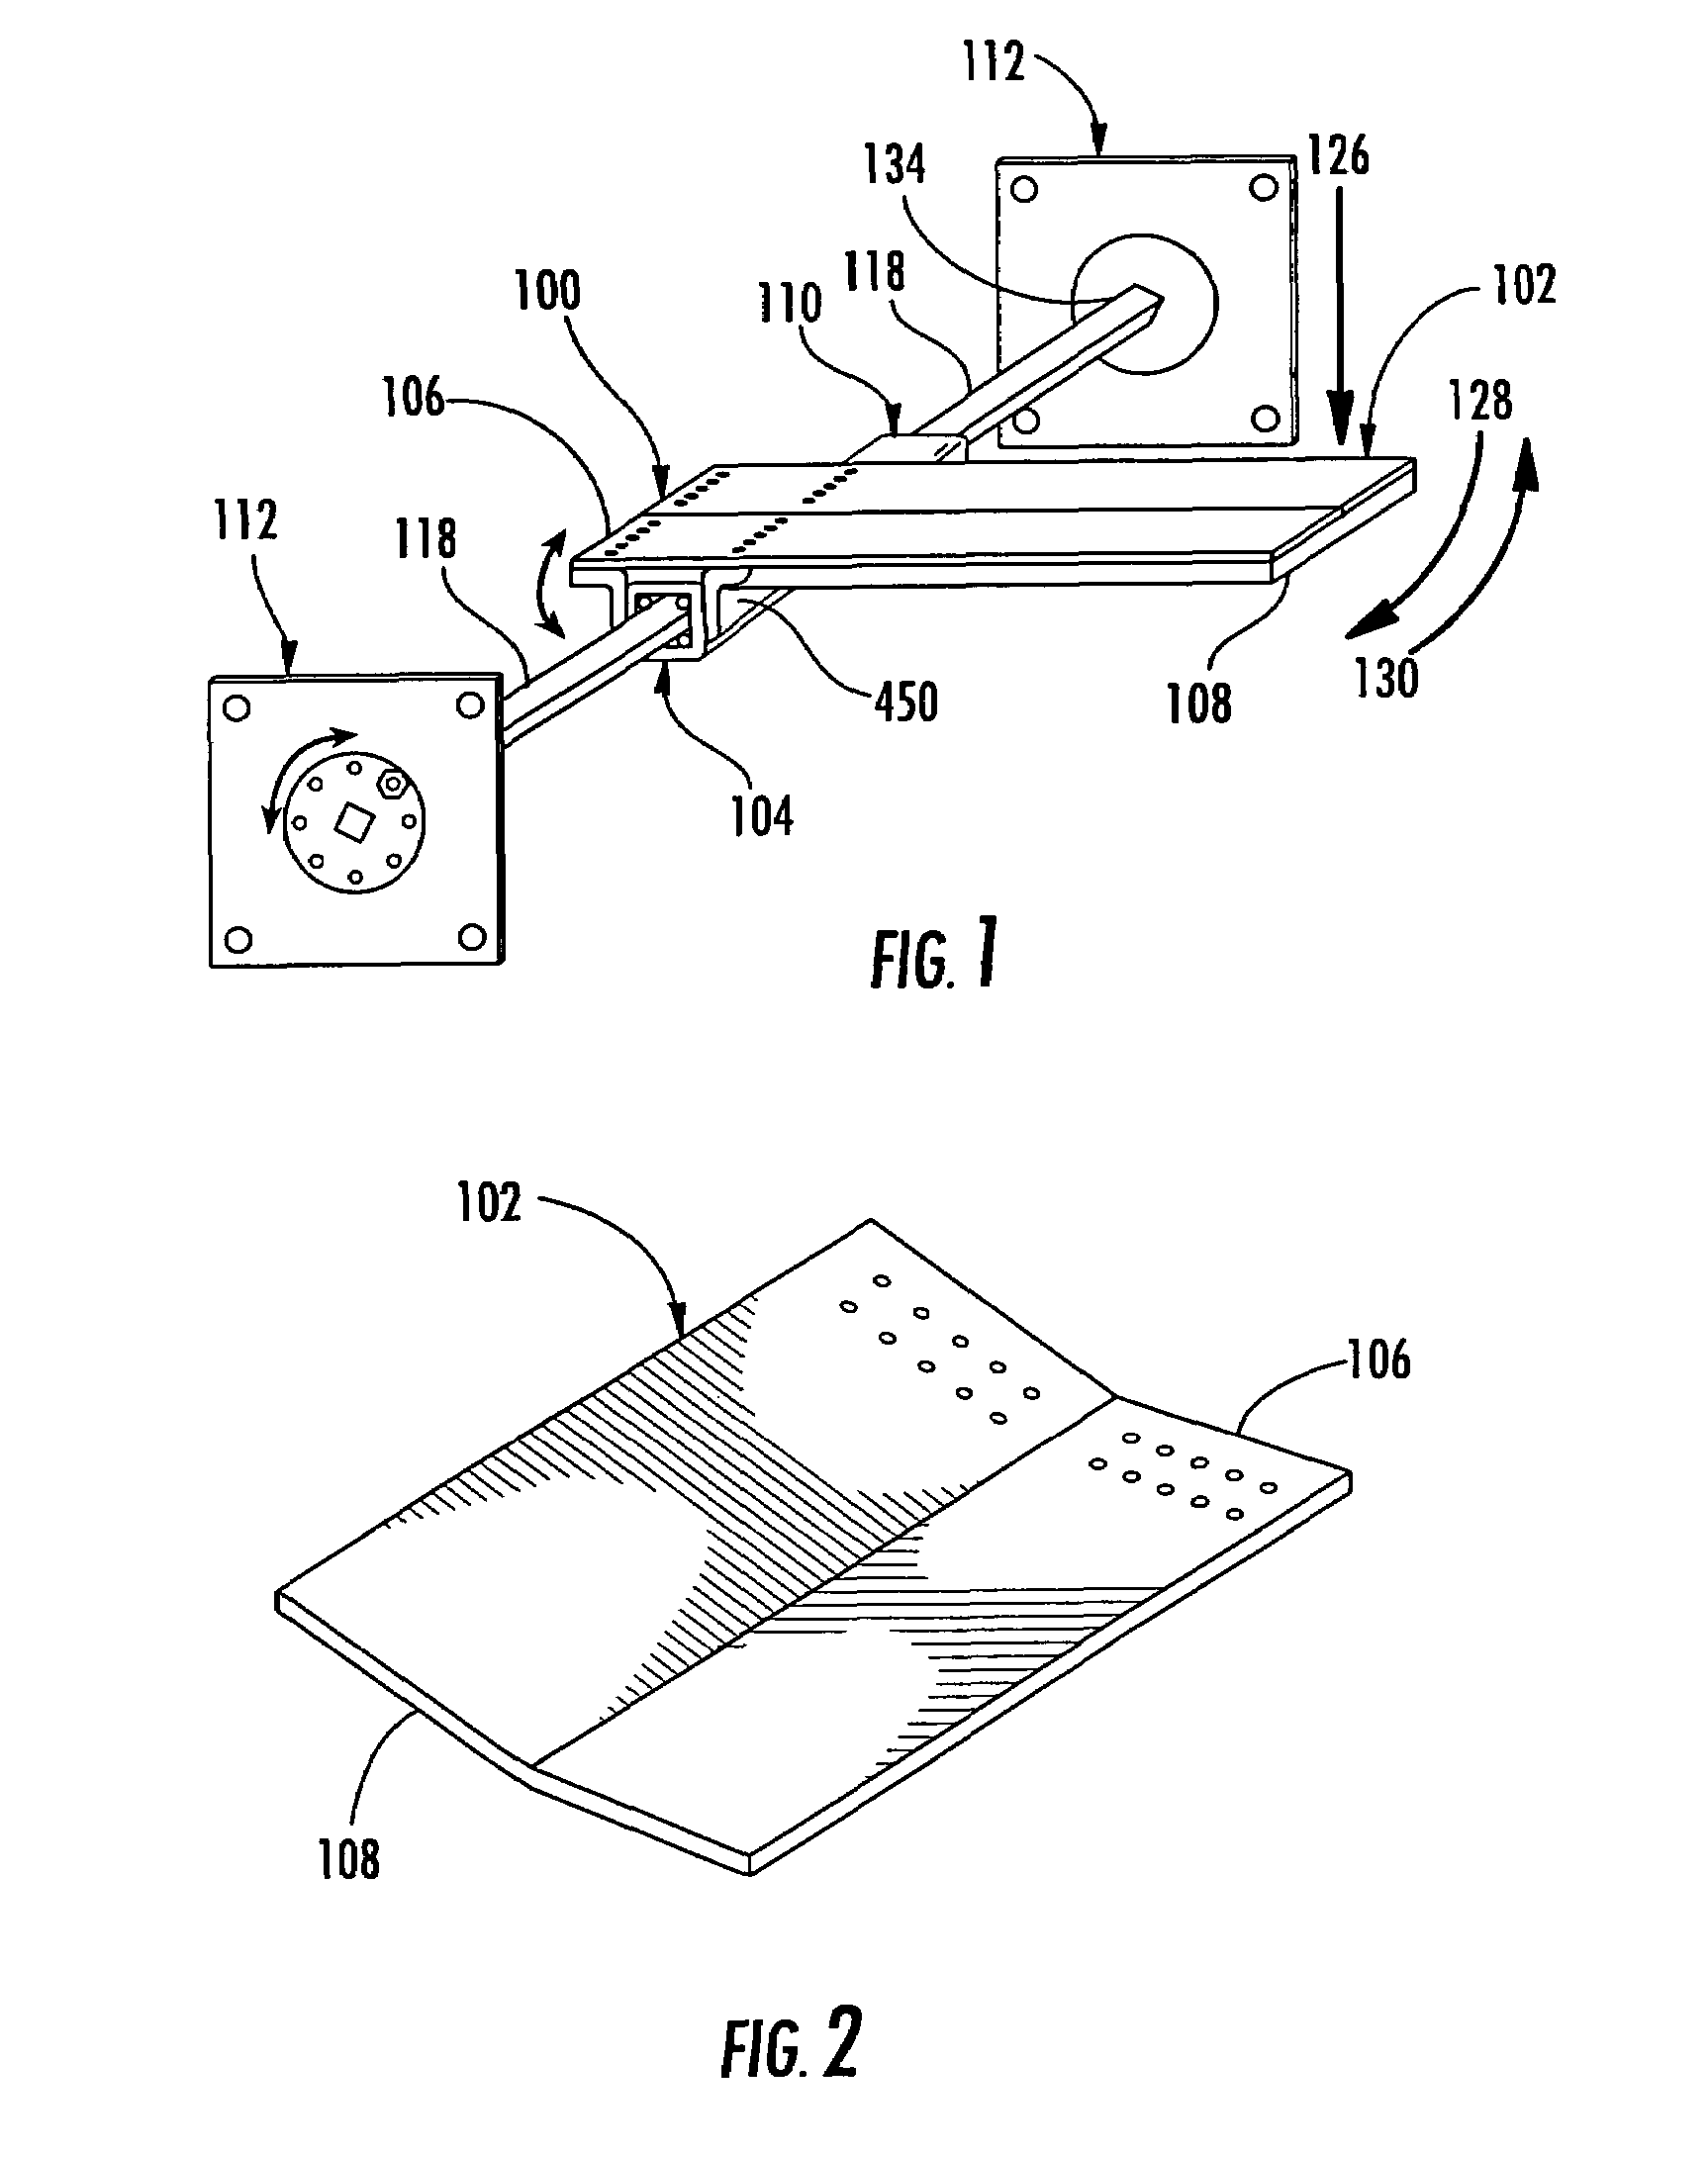 Method and apparatus for diverting material